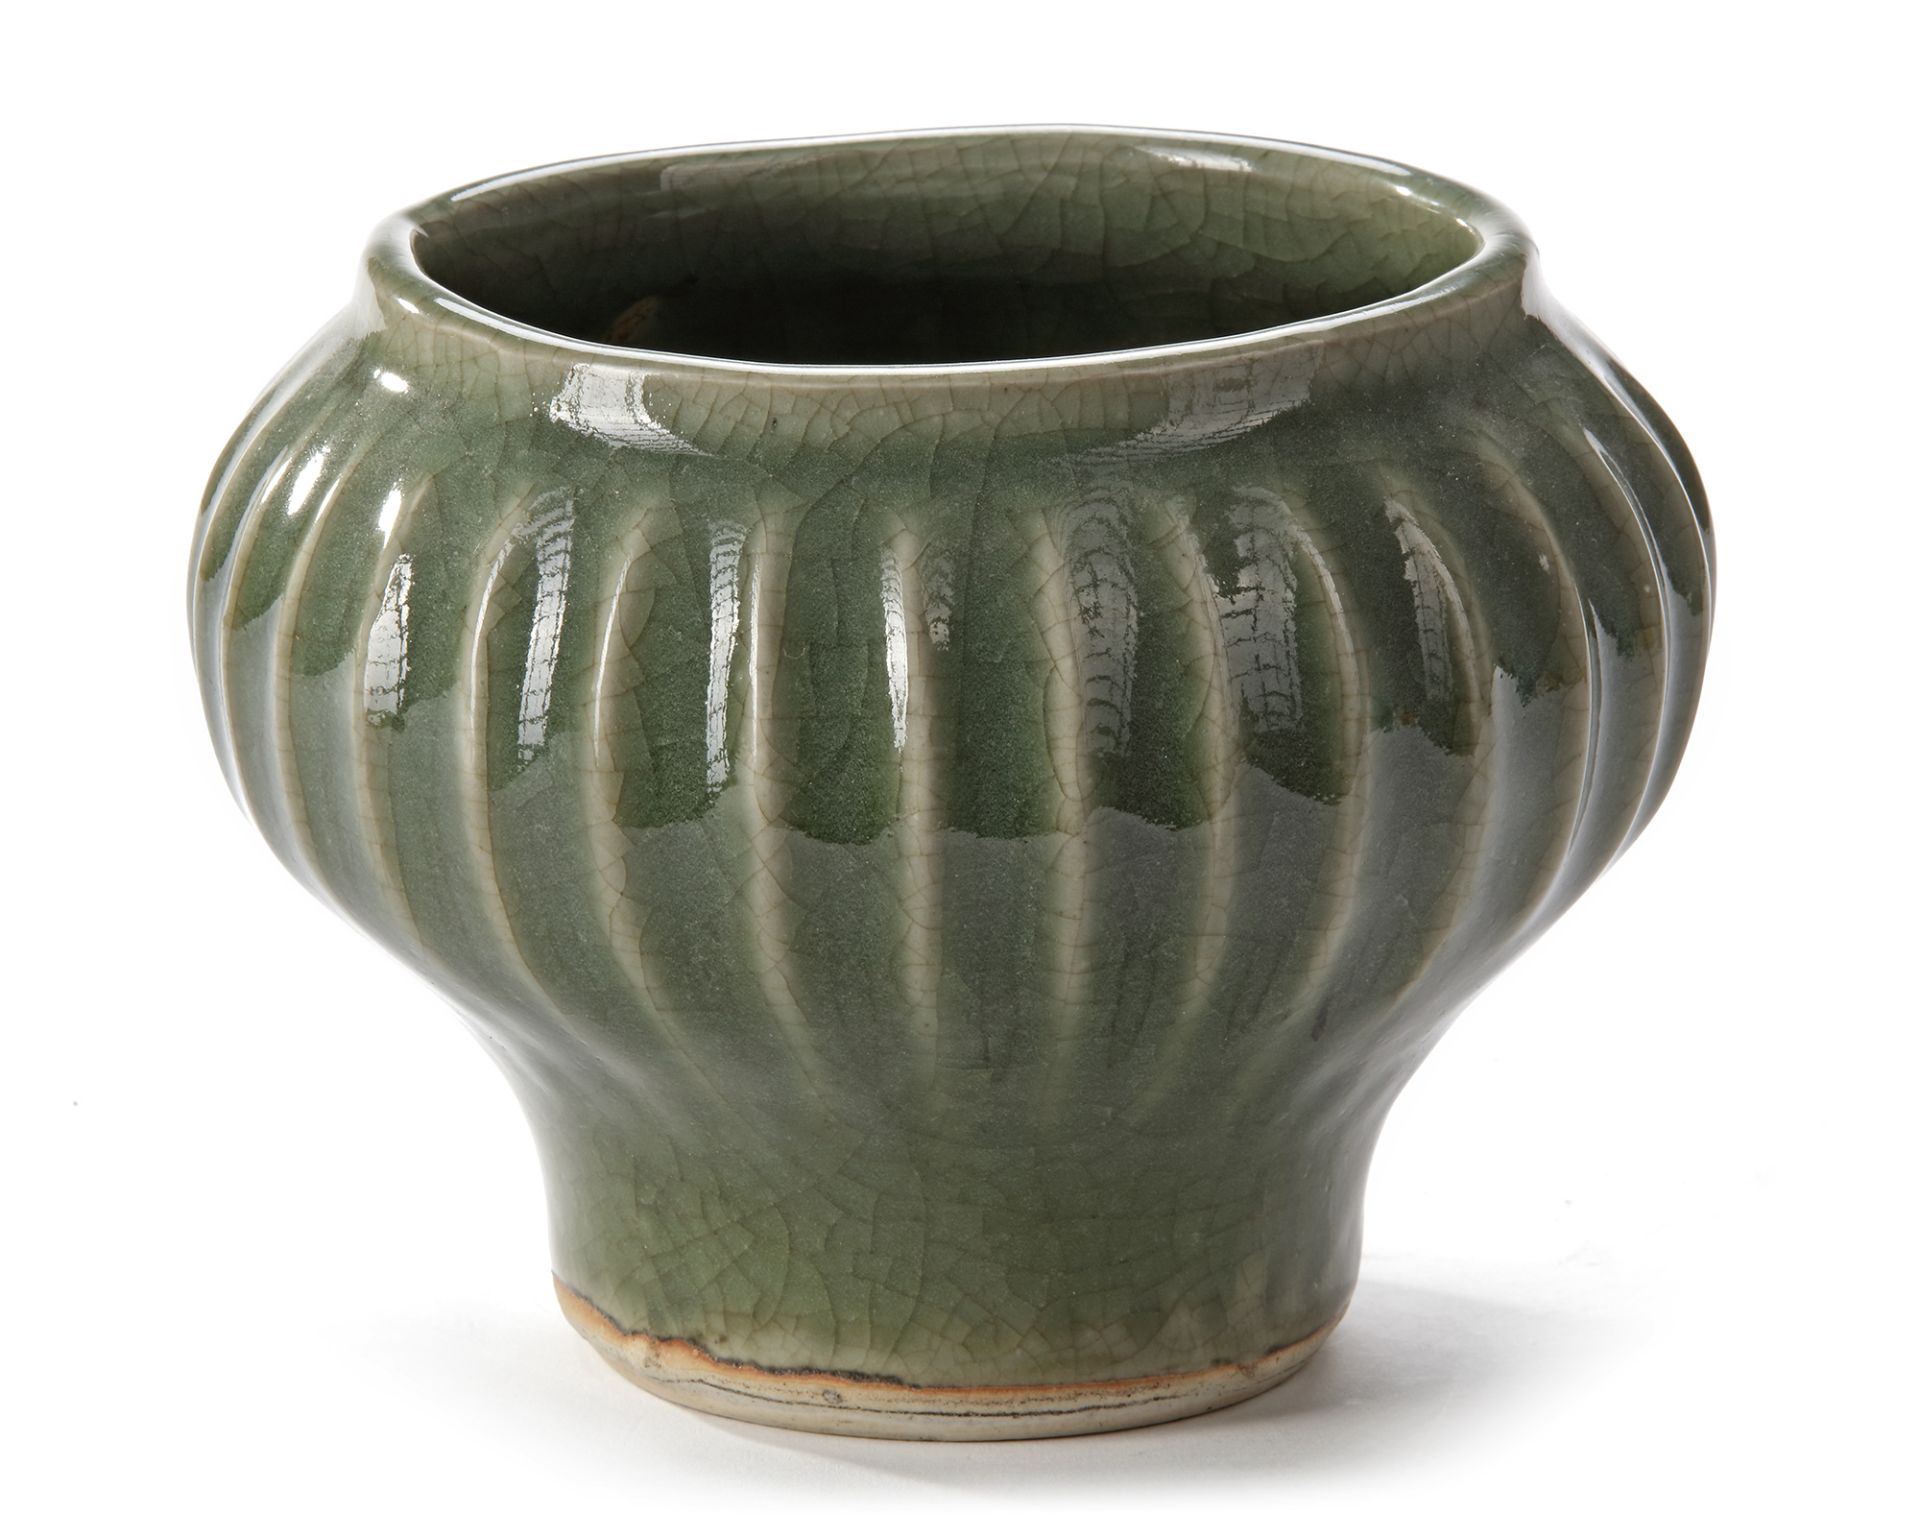 THREE CHINESE CELADON WARES, SONG DYNASTY (960-1127 AD) /MING DYNASTY (1368-1644) - Image 3 of 5